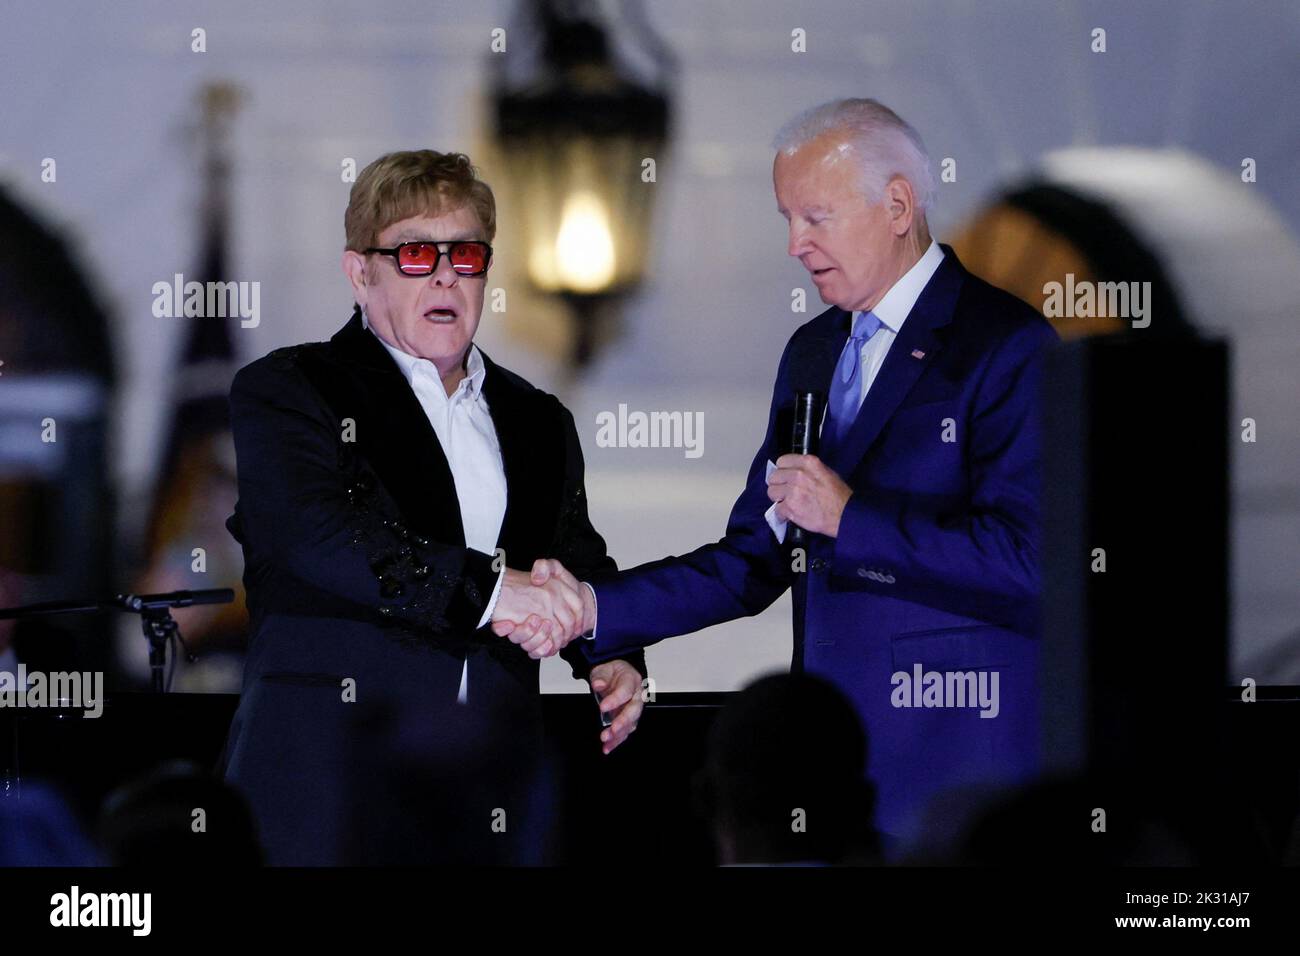 British rocker Elton John reacts to being awarded the National Humanities Medal by U.S. President Joe Biden at the White House in Washington, U.S., September 23, 2022. REUTERS/Evelyn Hockstein Stock Photo